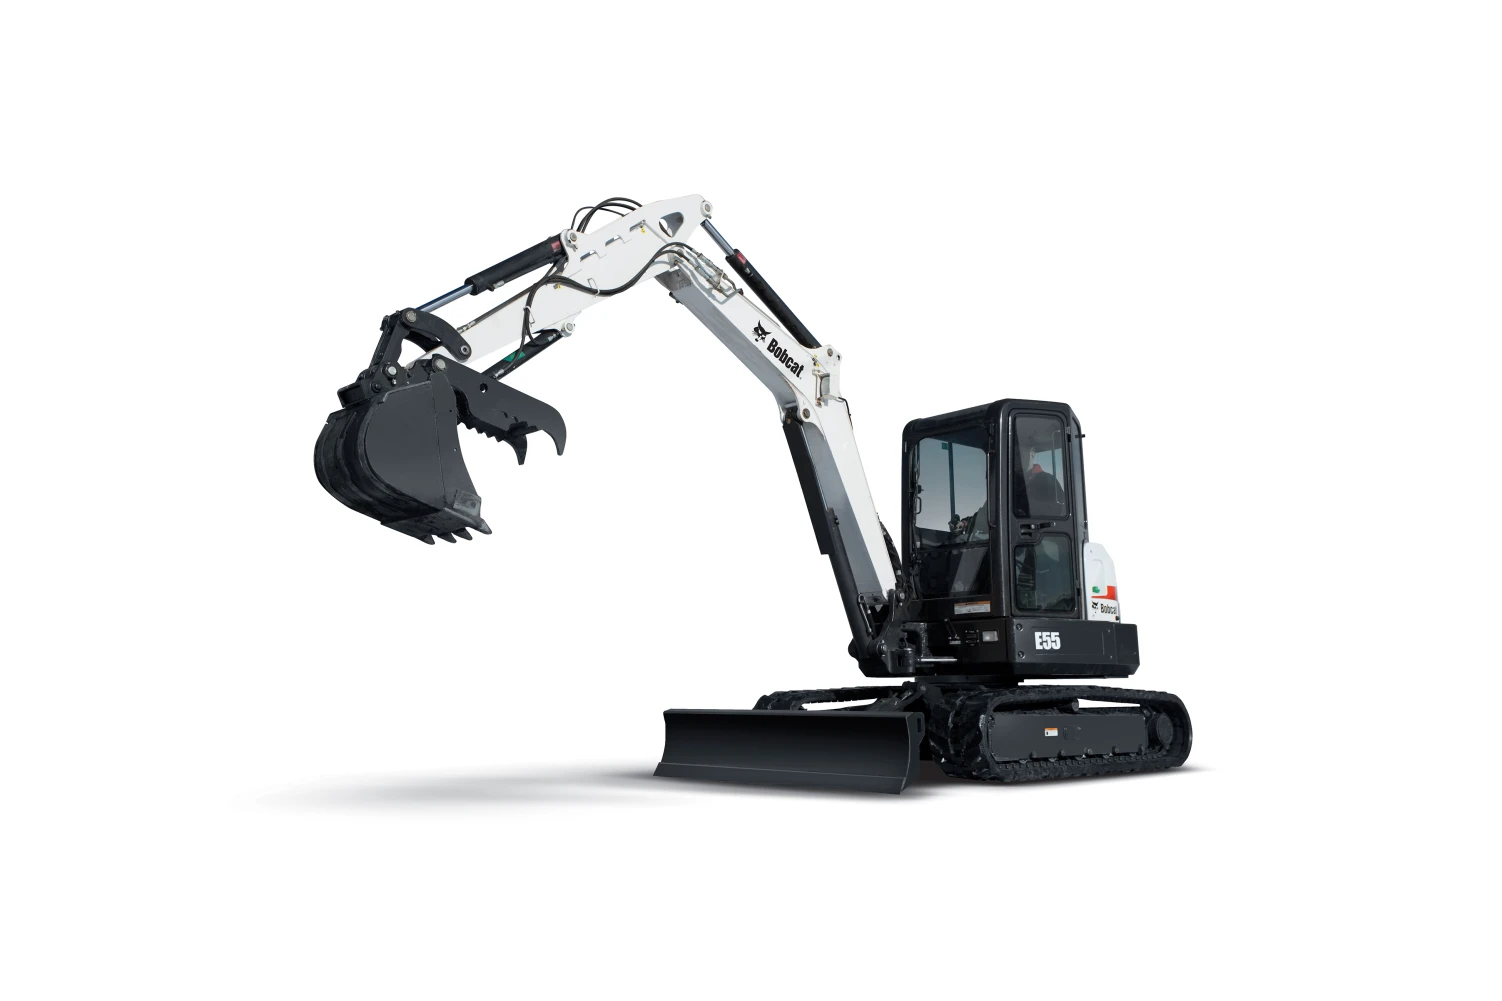 Browse Specs and more for the E55 Compact Excavator - Bobcat of the Rockies